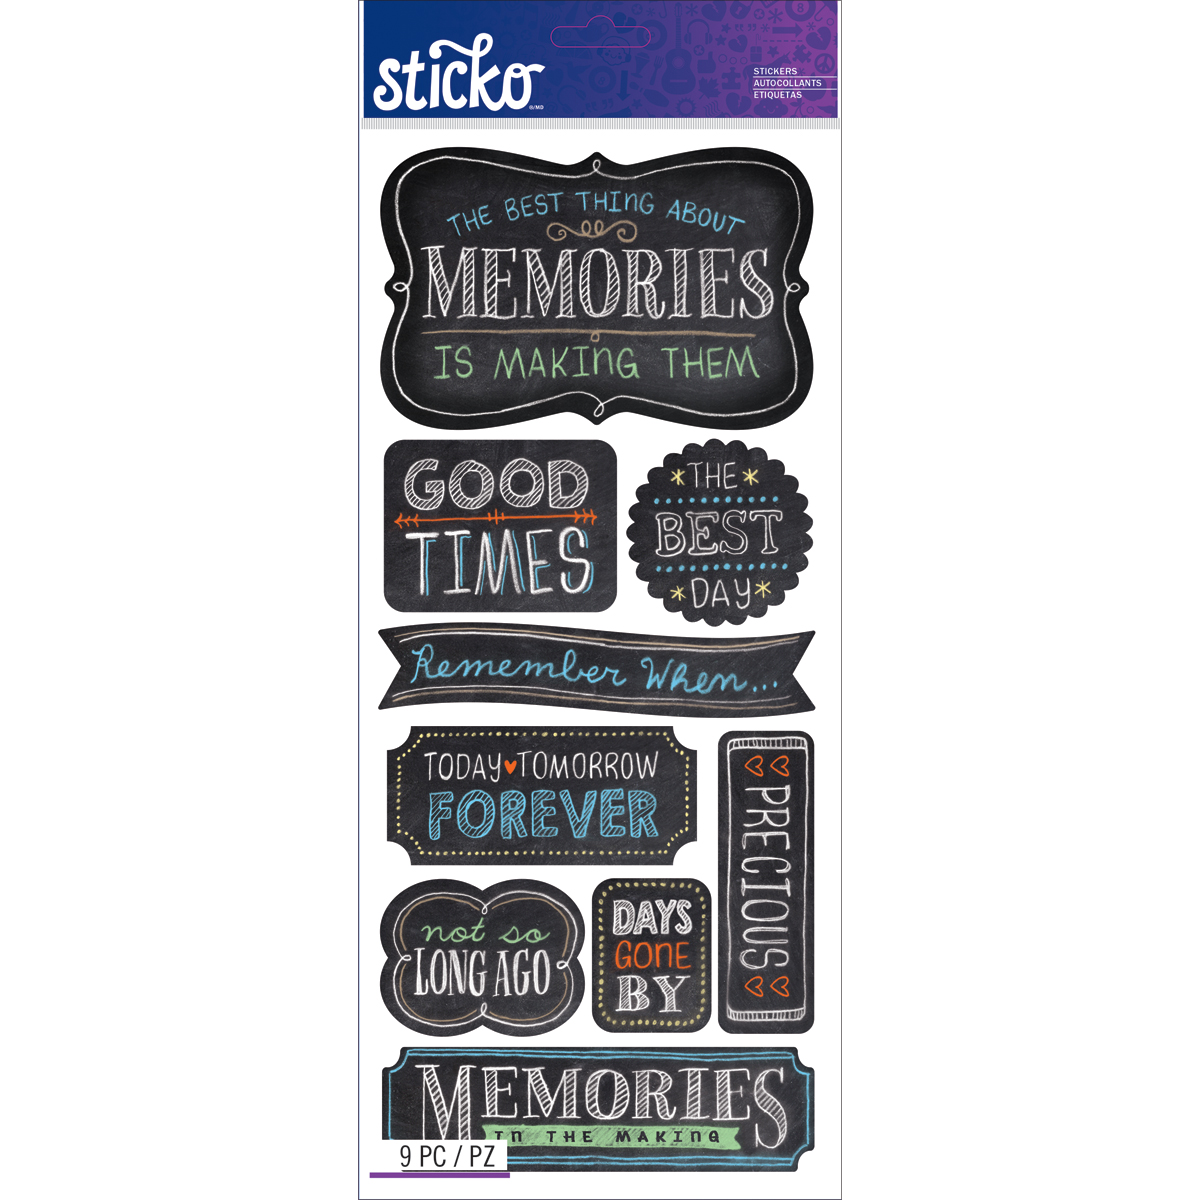 Sticko Stickers-Memories - image 2 of 2